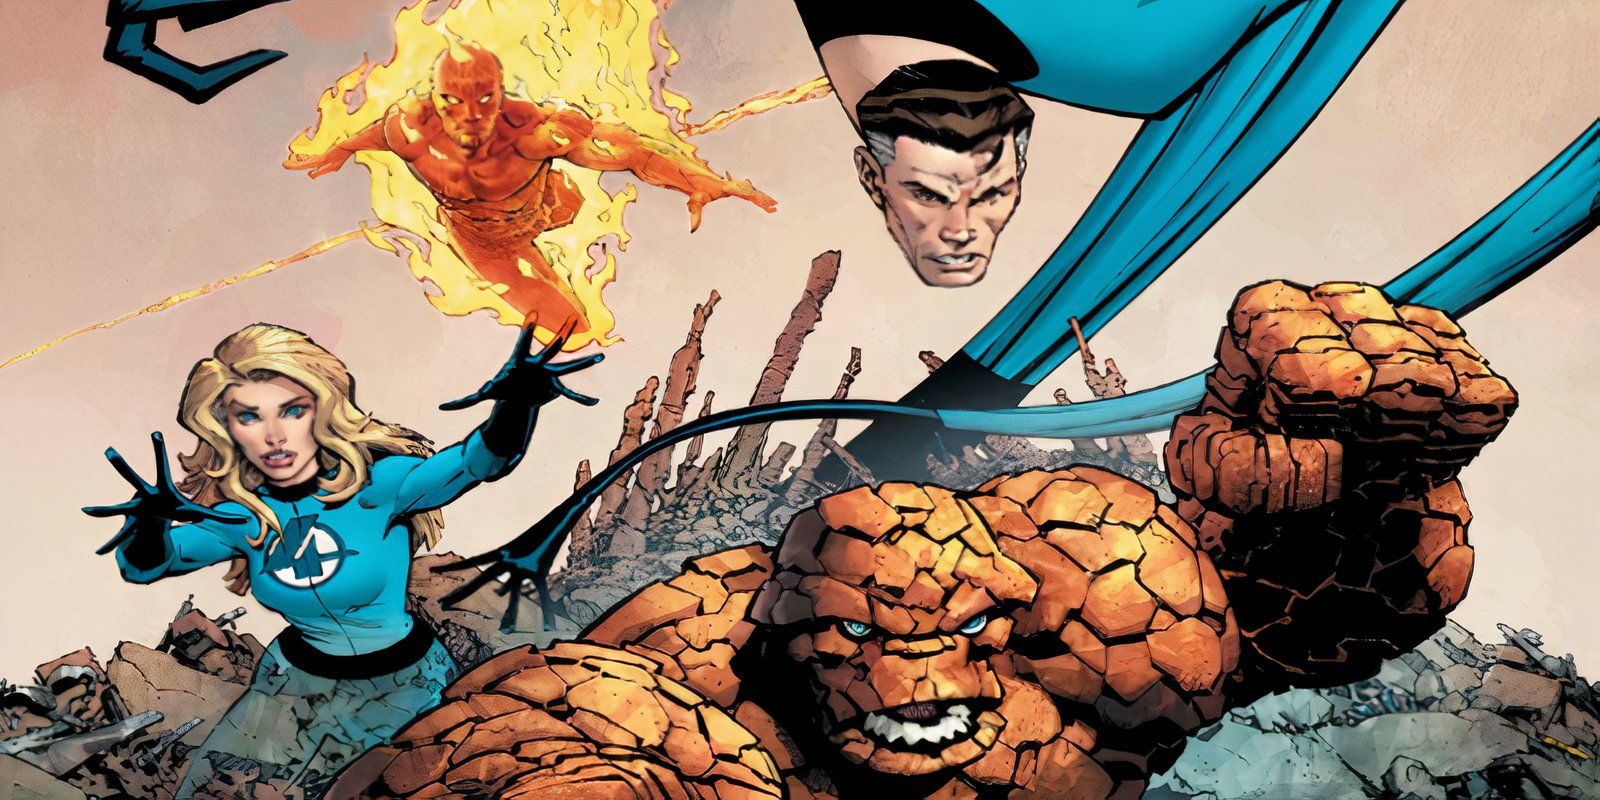 Fantastic Four Confirms New Love Interest for Human Torch as Marvel Debuts New Alien Species